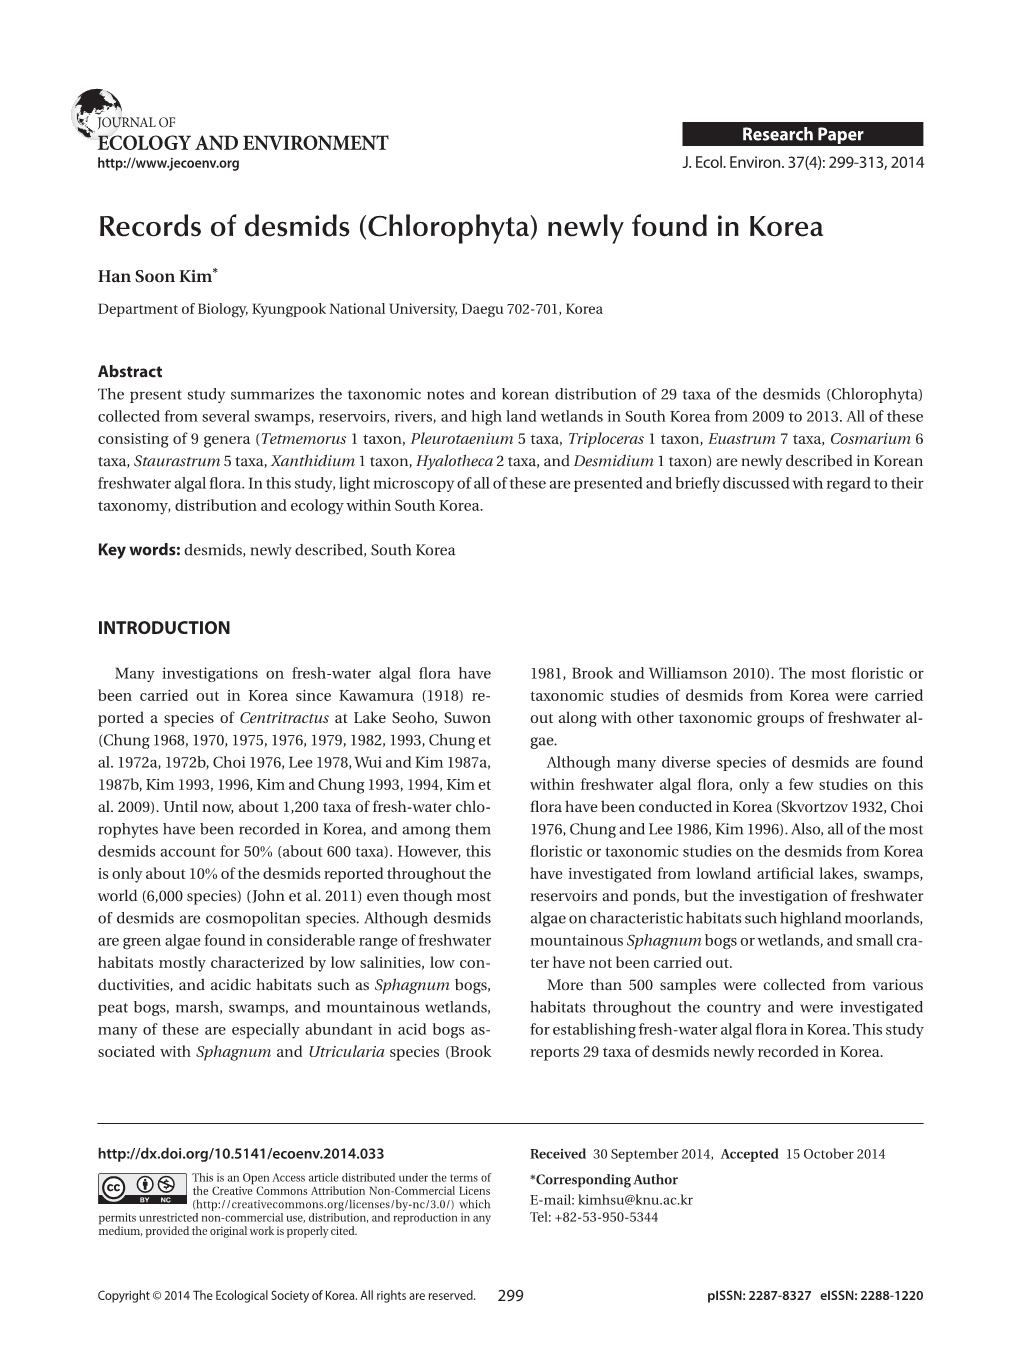 Records of Desmids (Chlorophyta) Newly Found in Korea